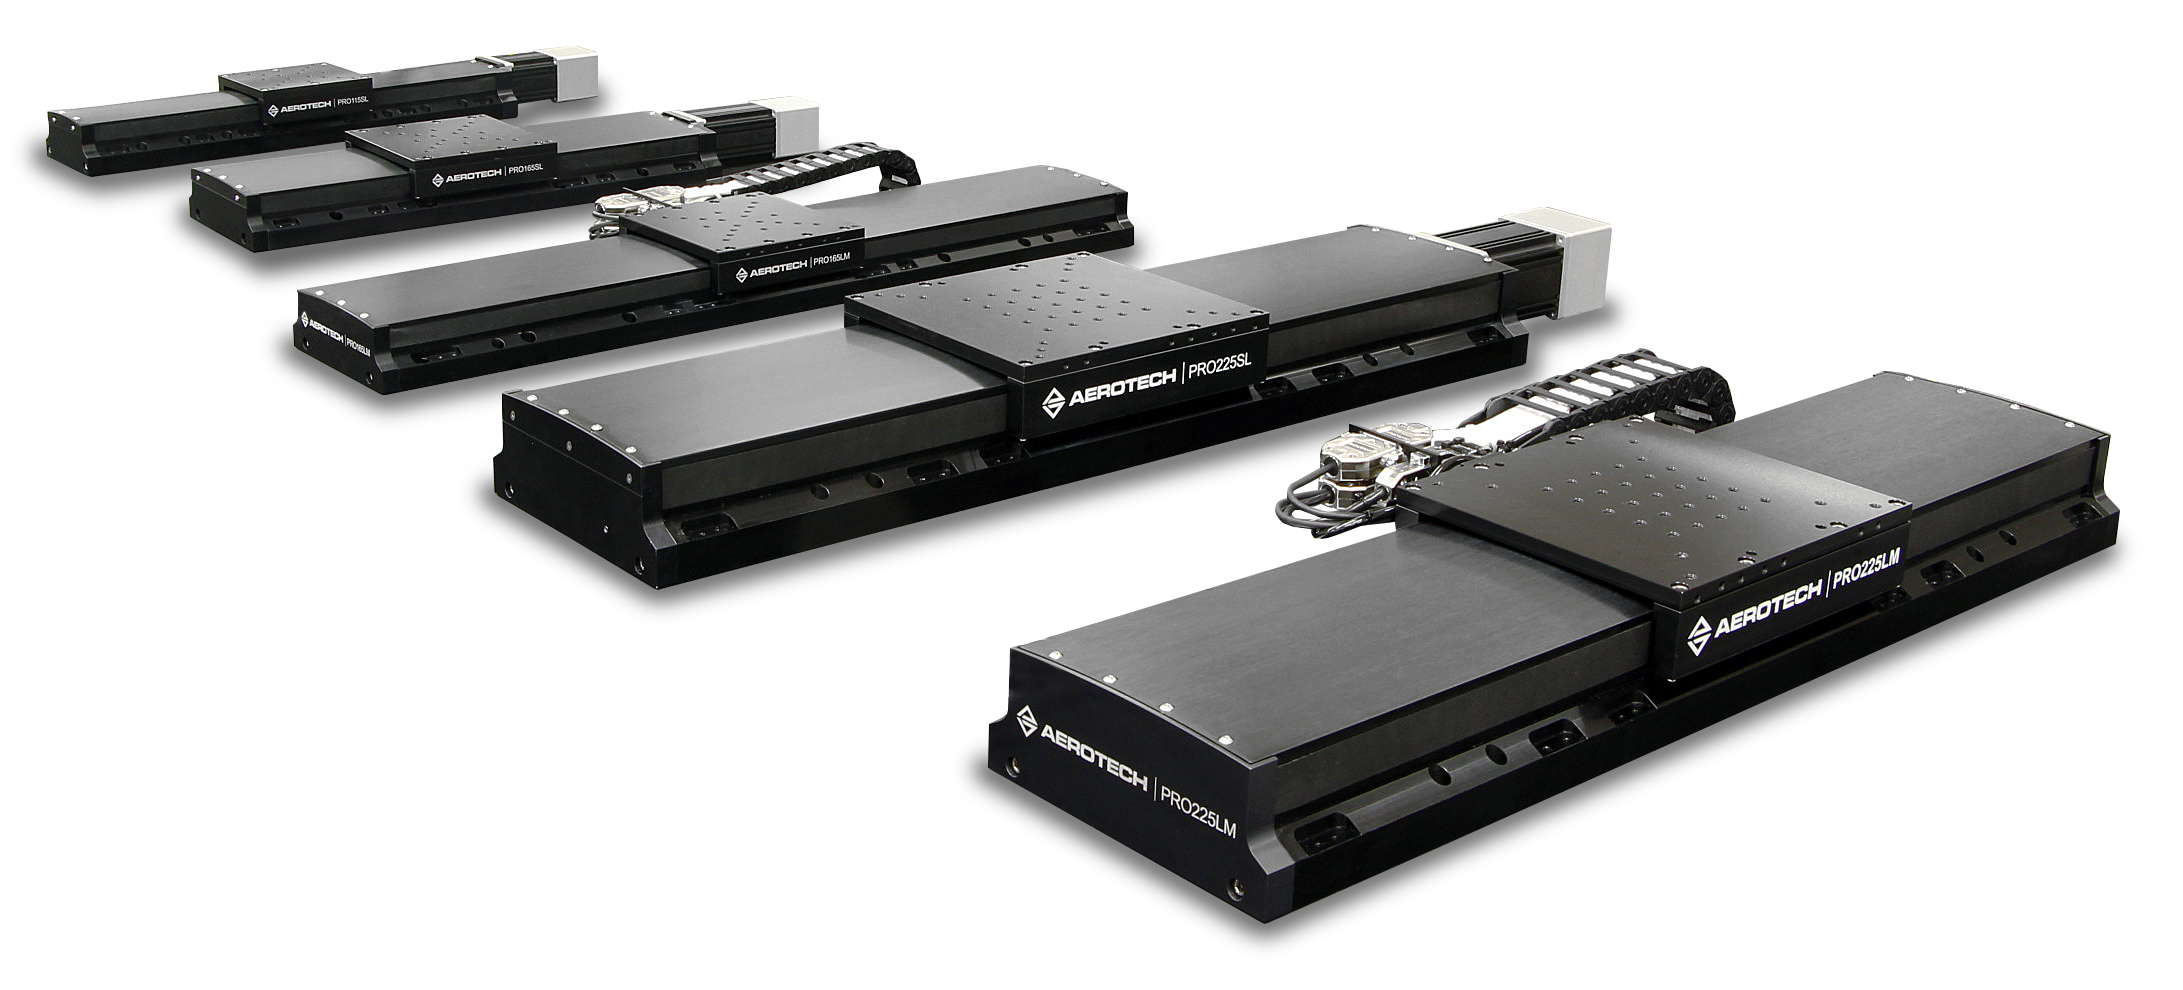 Aerotech PRO Series Gen II linear stages